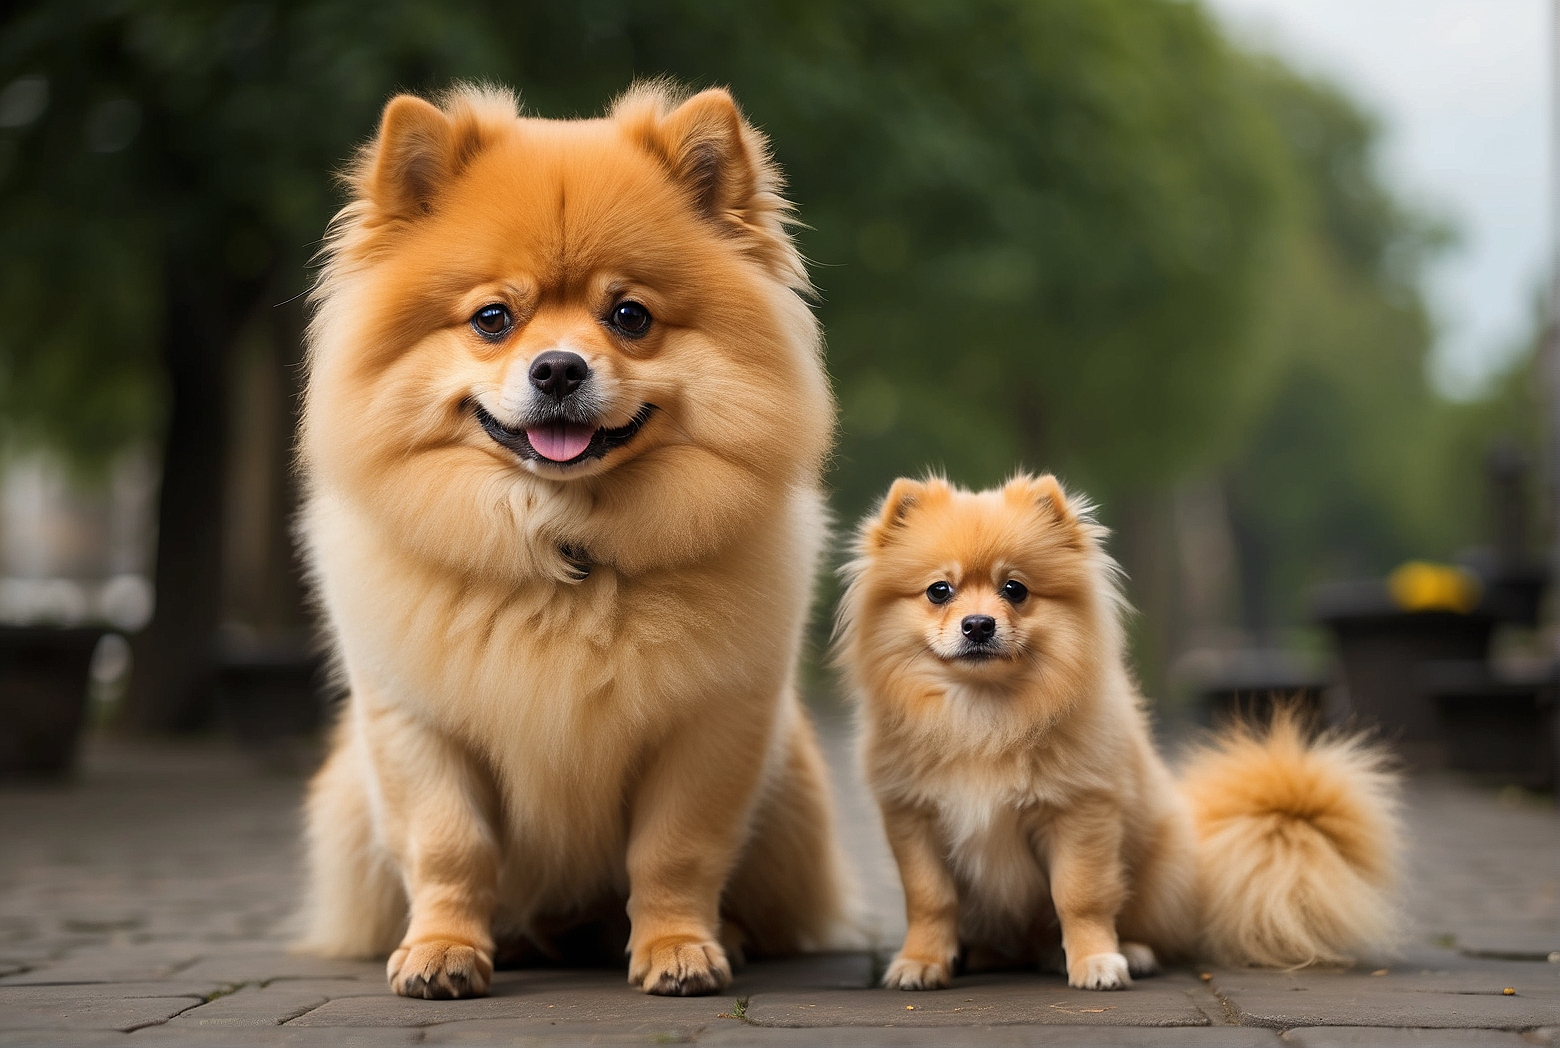 Strong dog breeds compared to Pomeranians